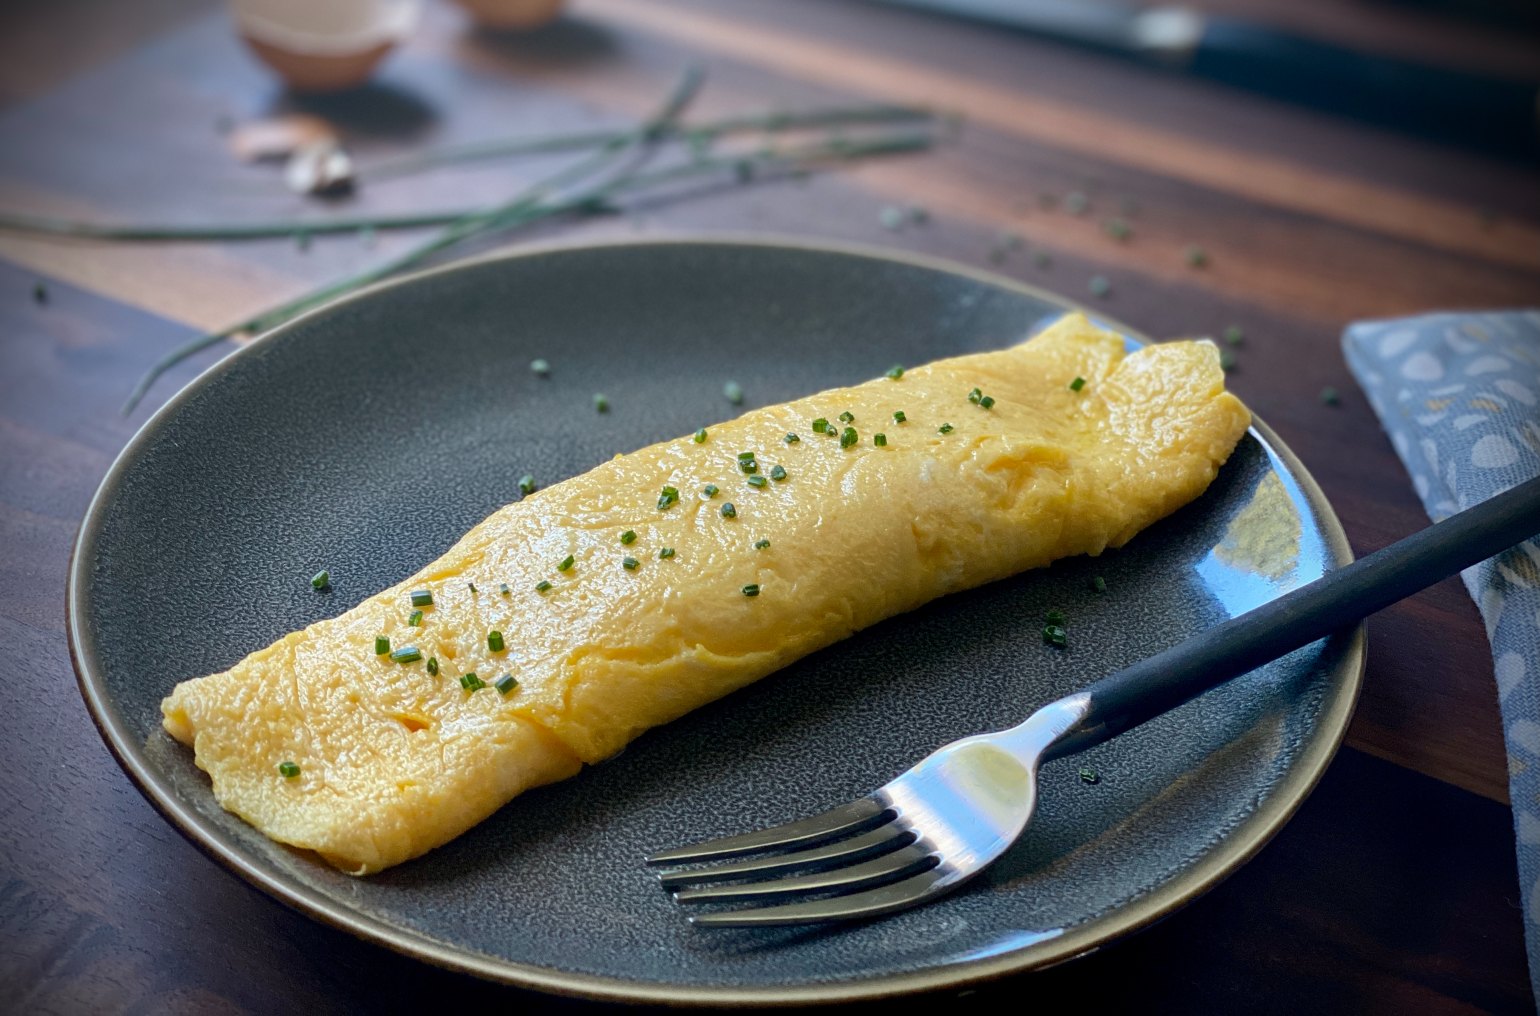 Omelet topped with chives on a black plate with a fork.